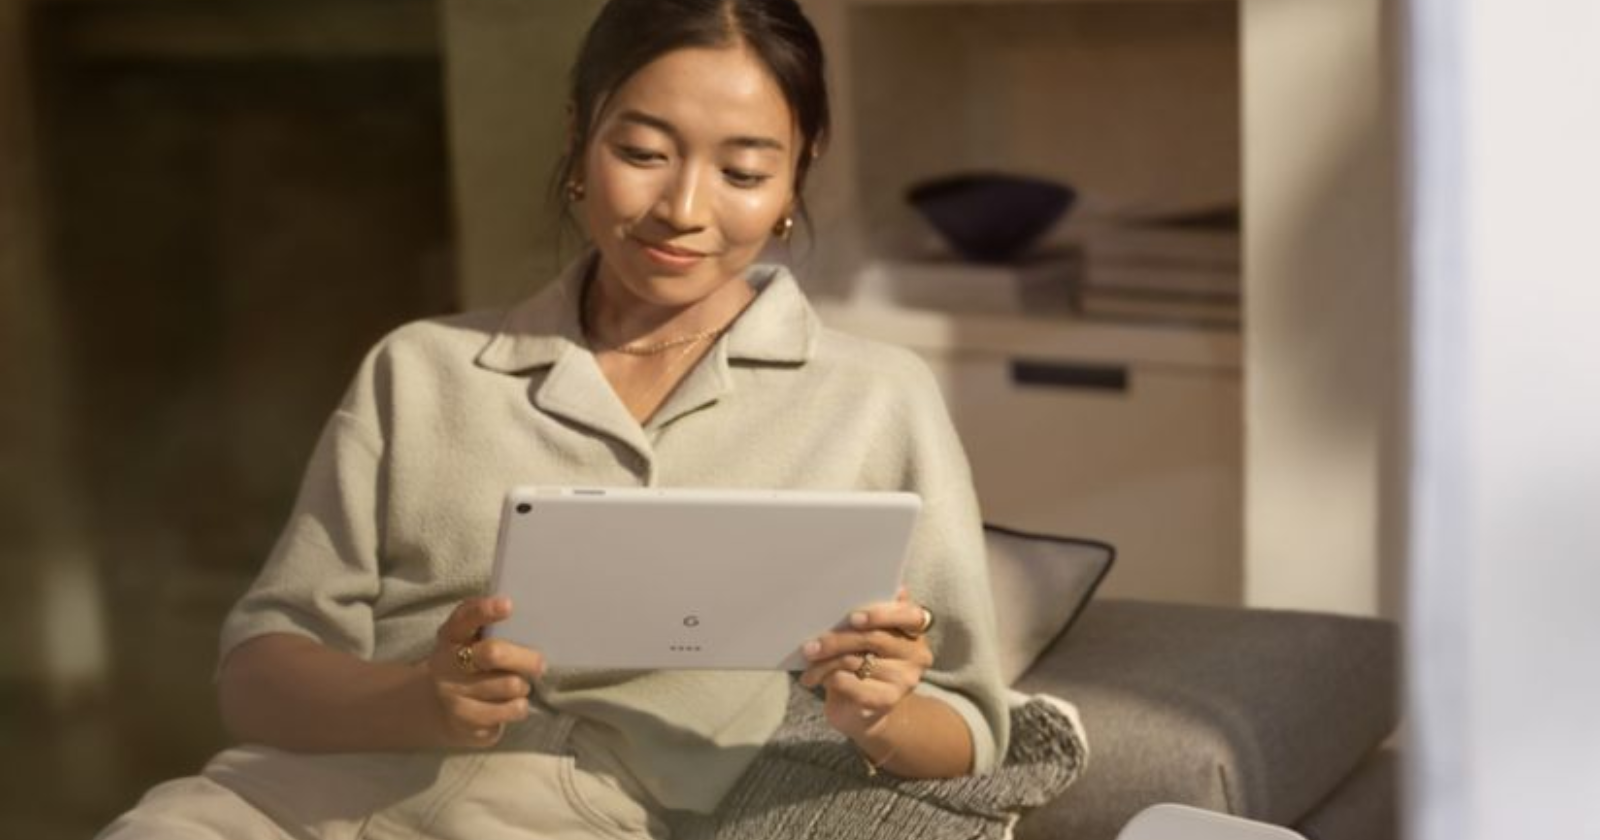 Get AUD 300 ($204.27) off on Google Pixel Tablet with this Telstra deal in Australia